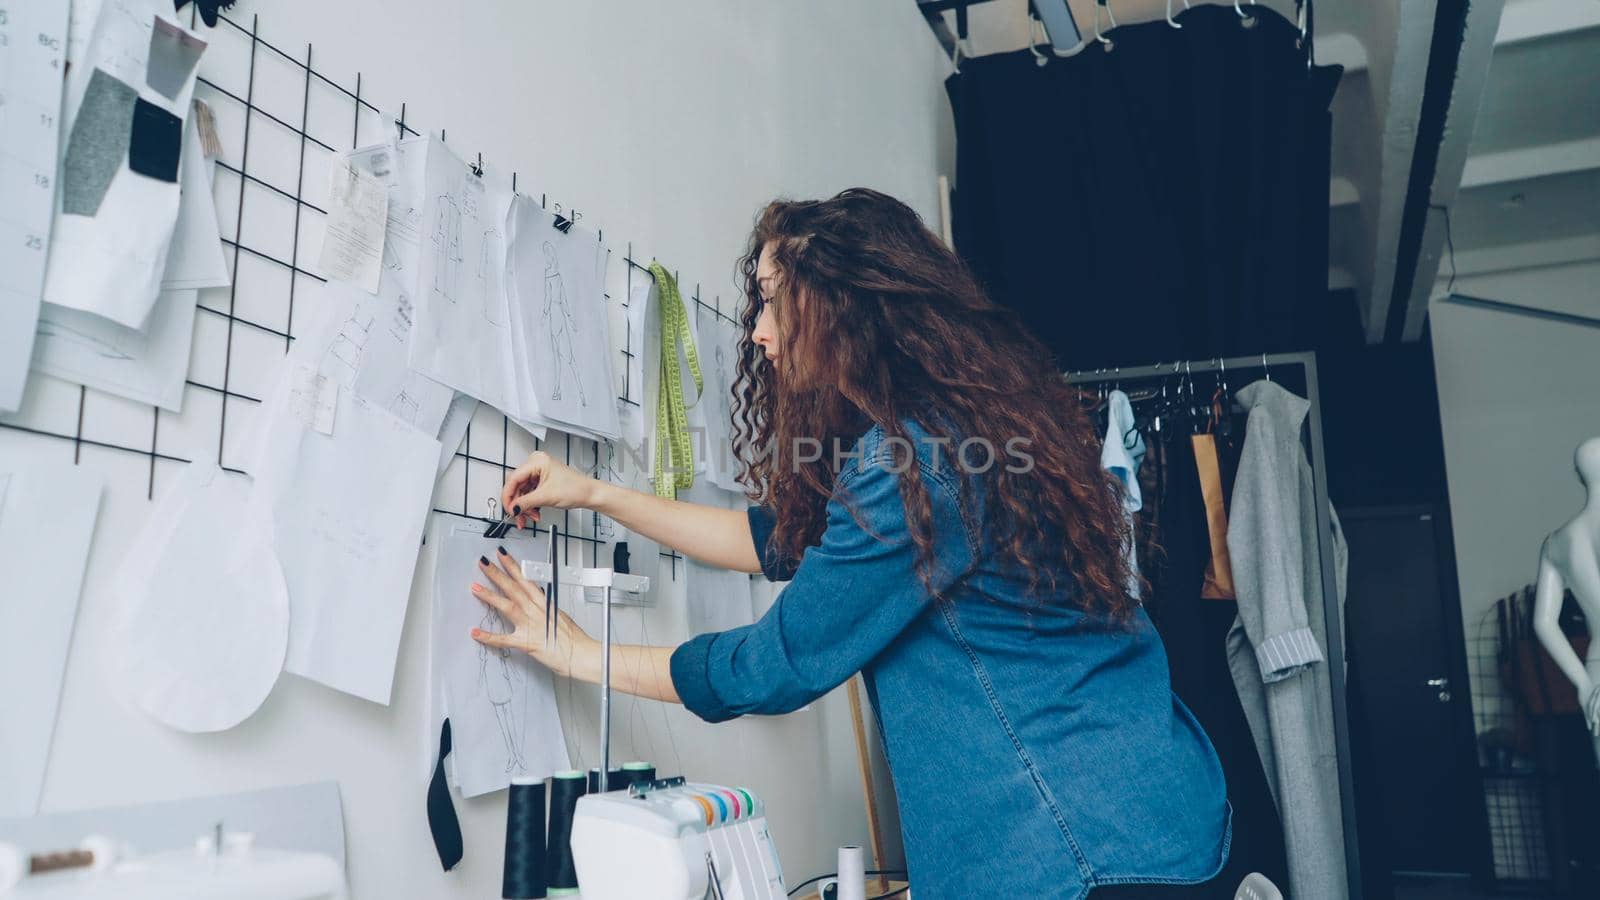 Low angle view of young fashion designer looking at sketches and hanging drawings on wall in modern loft style studio. Large collection of illustration above tailoring desk. by silverkblack